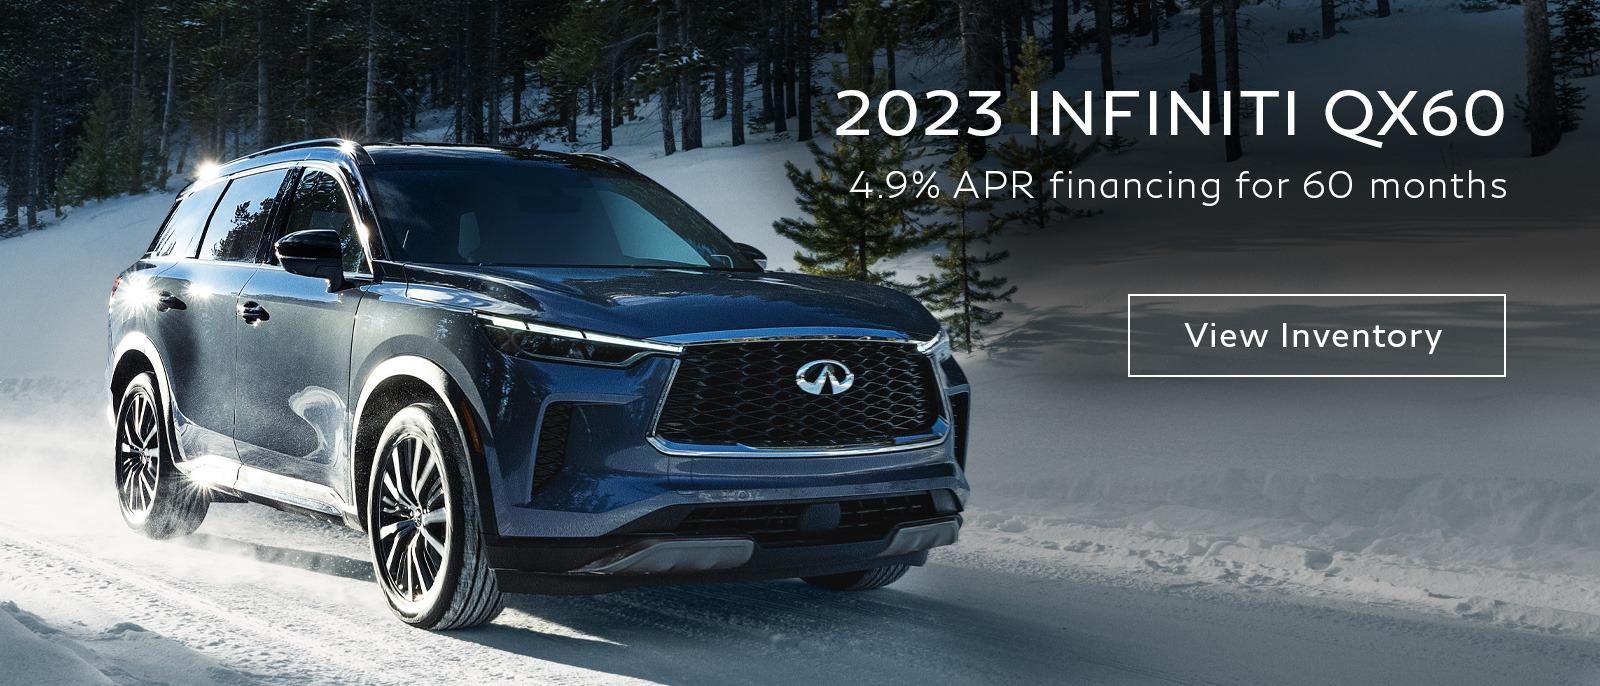 4.9% APR Financing for 60 months on 2023 QX60